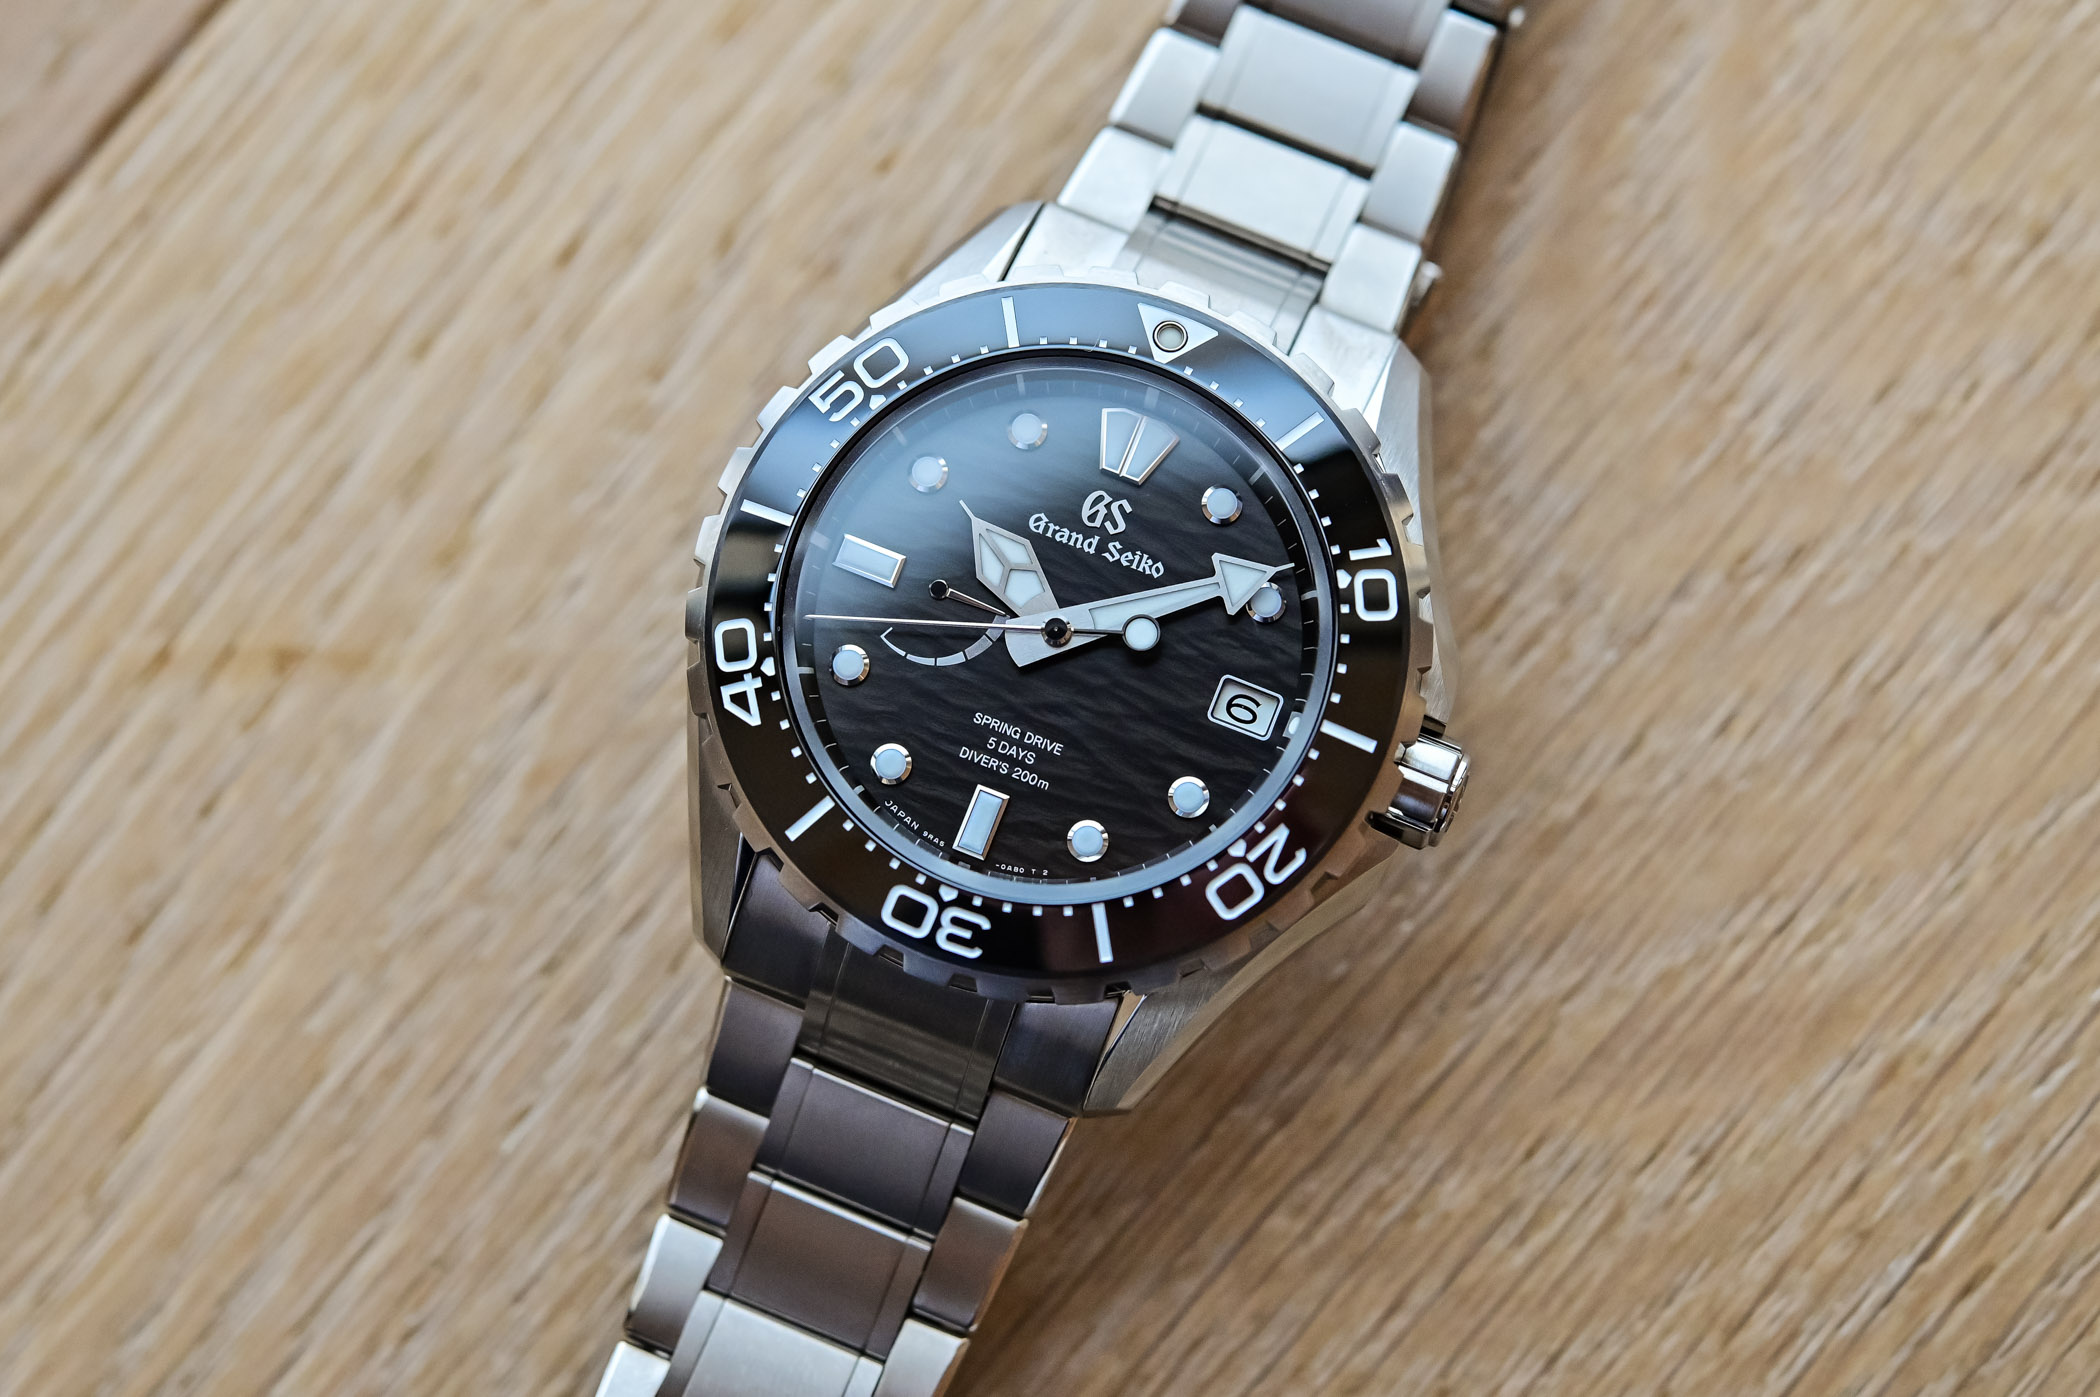 IV. Key Features to Look for in Dive Watches